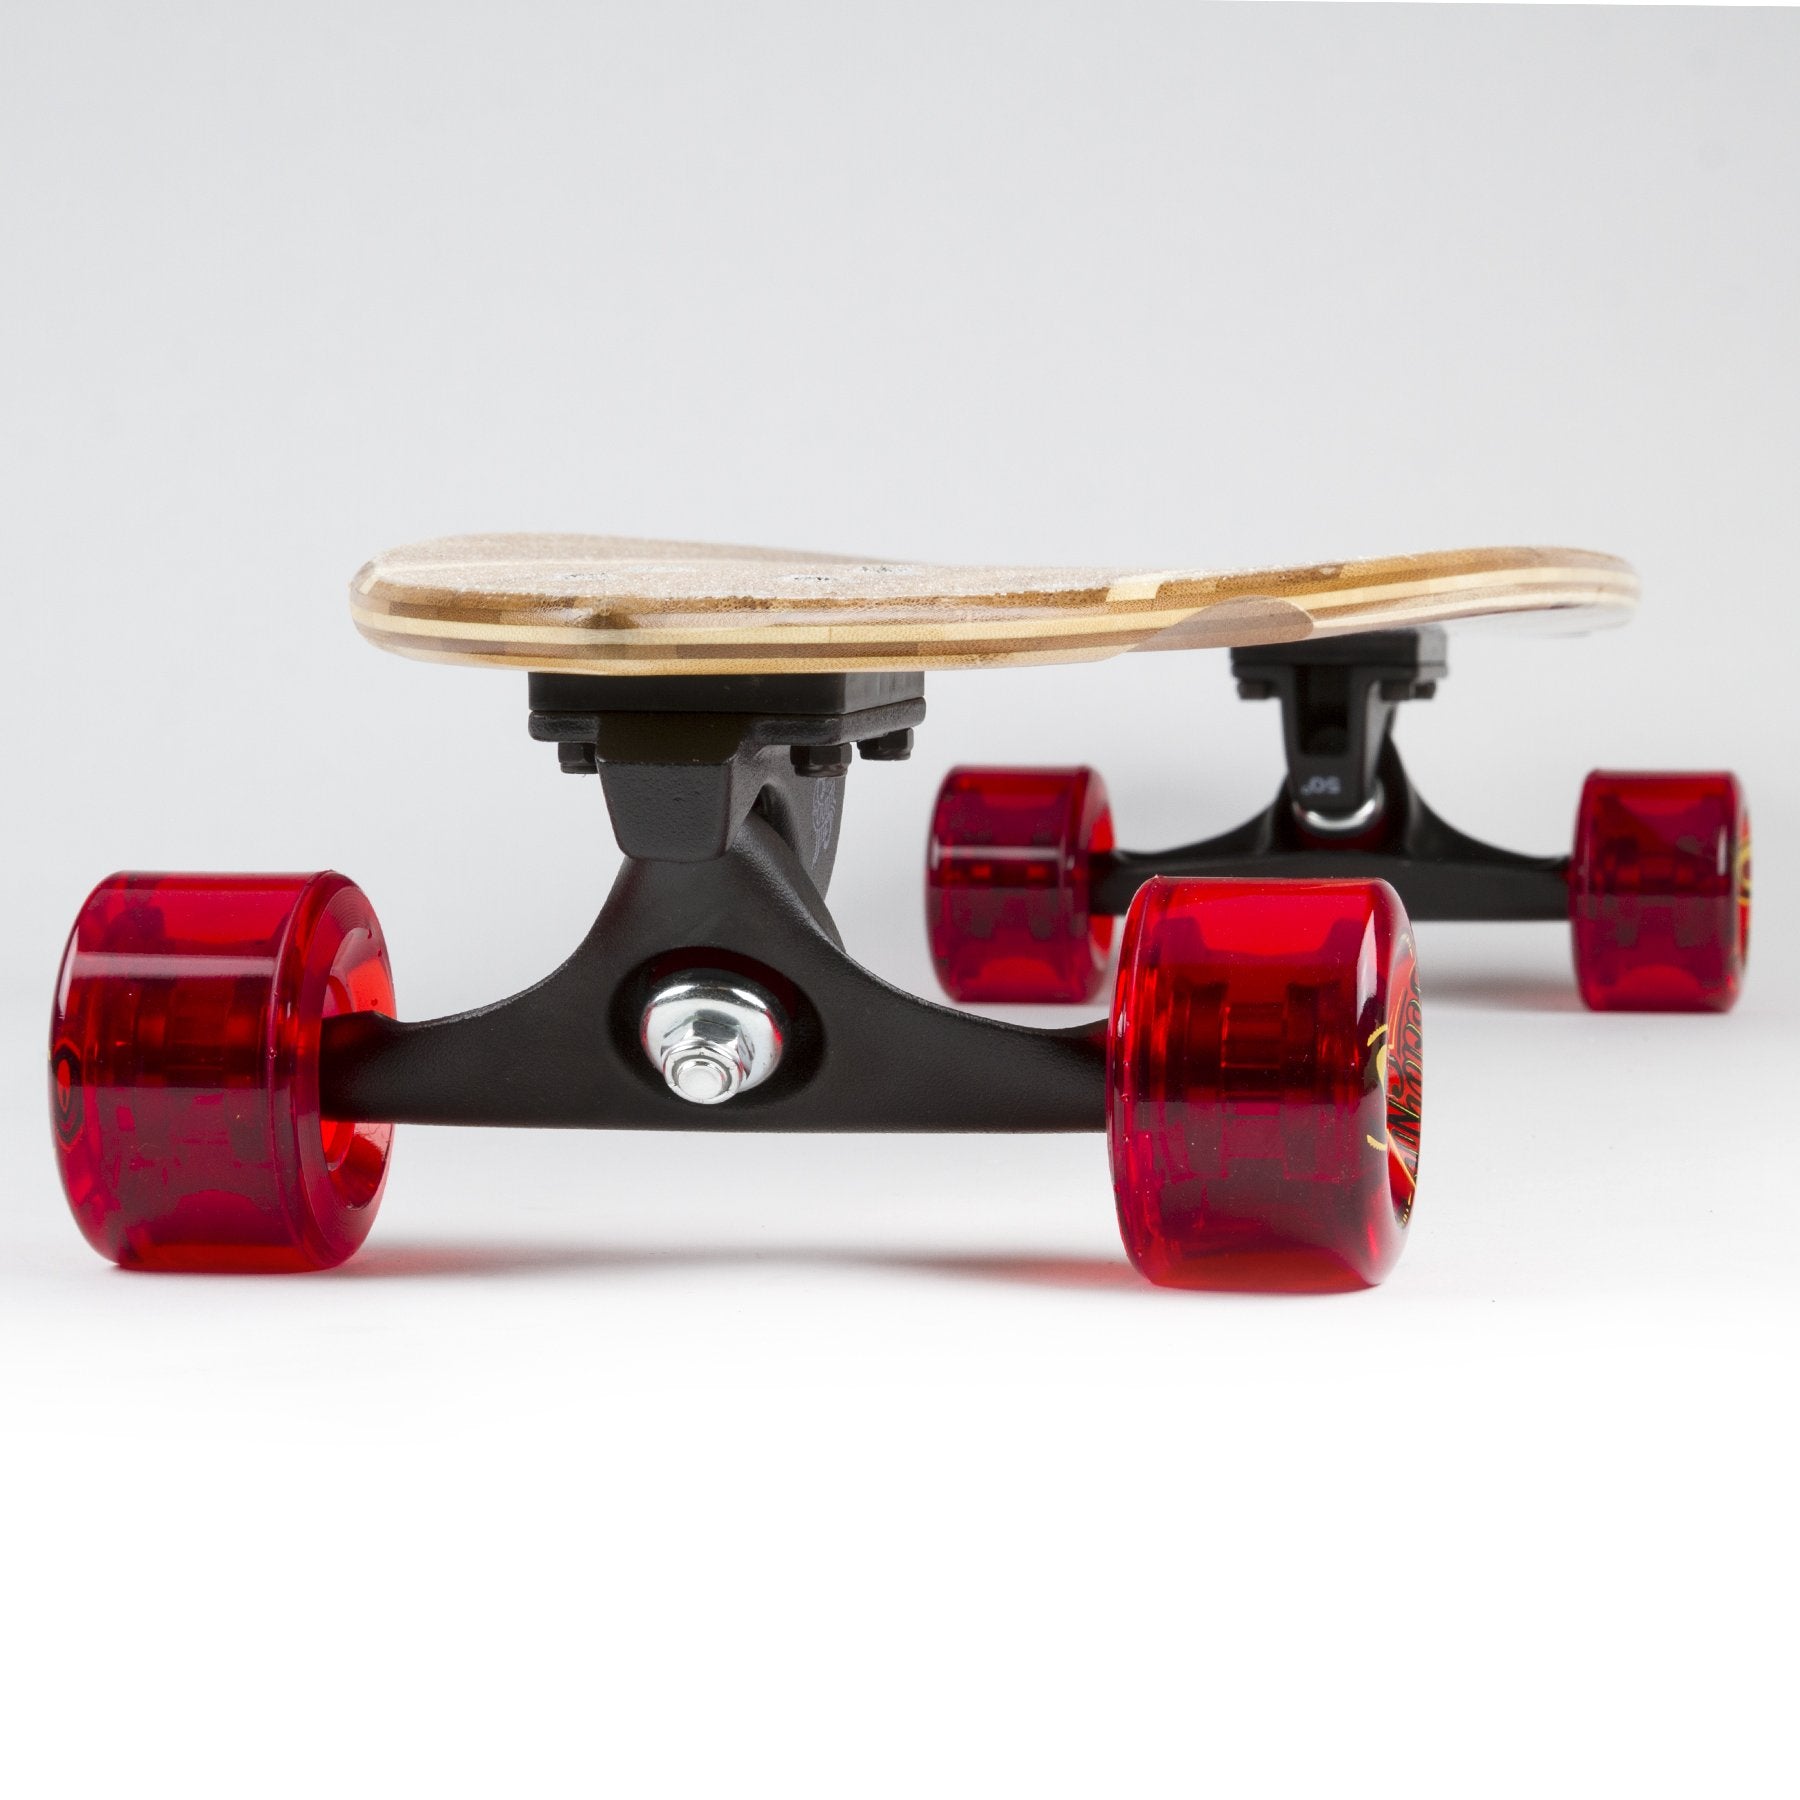 SECTOR 9 X BOB MARLEY NATURAL MYSTIC COMPLETE 38.5&quot; (Scratch sale) - The Drive Skateshop